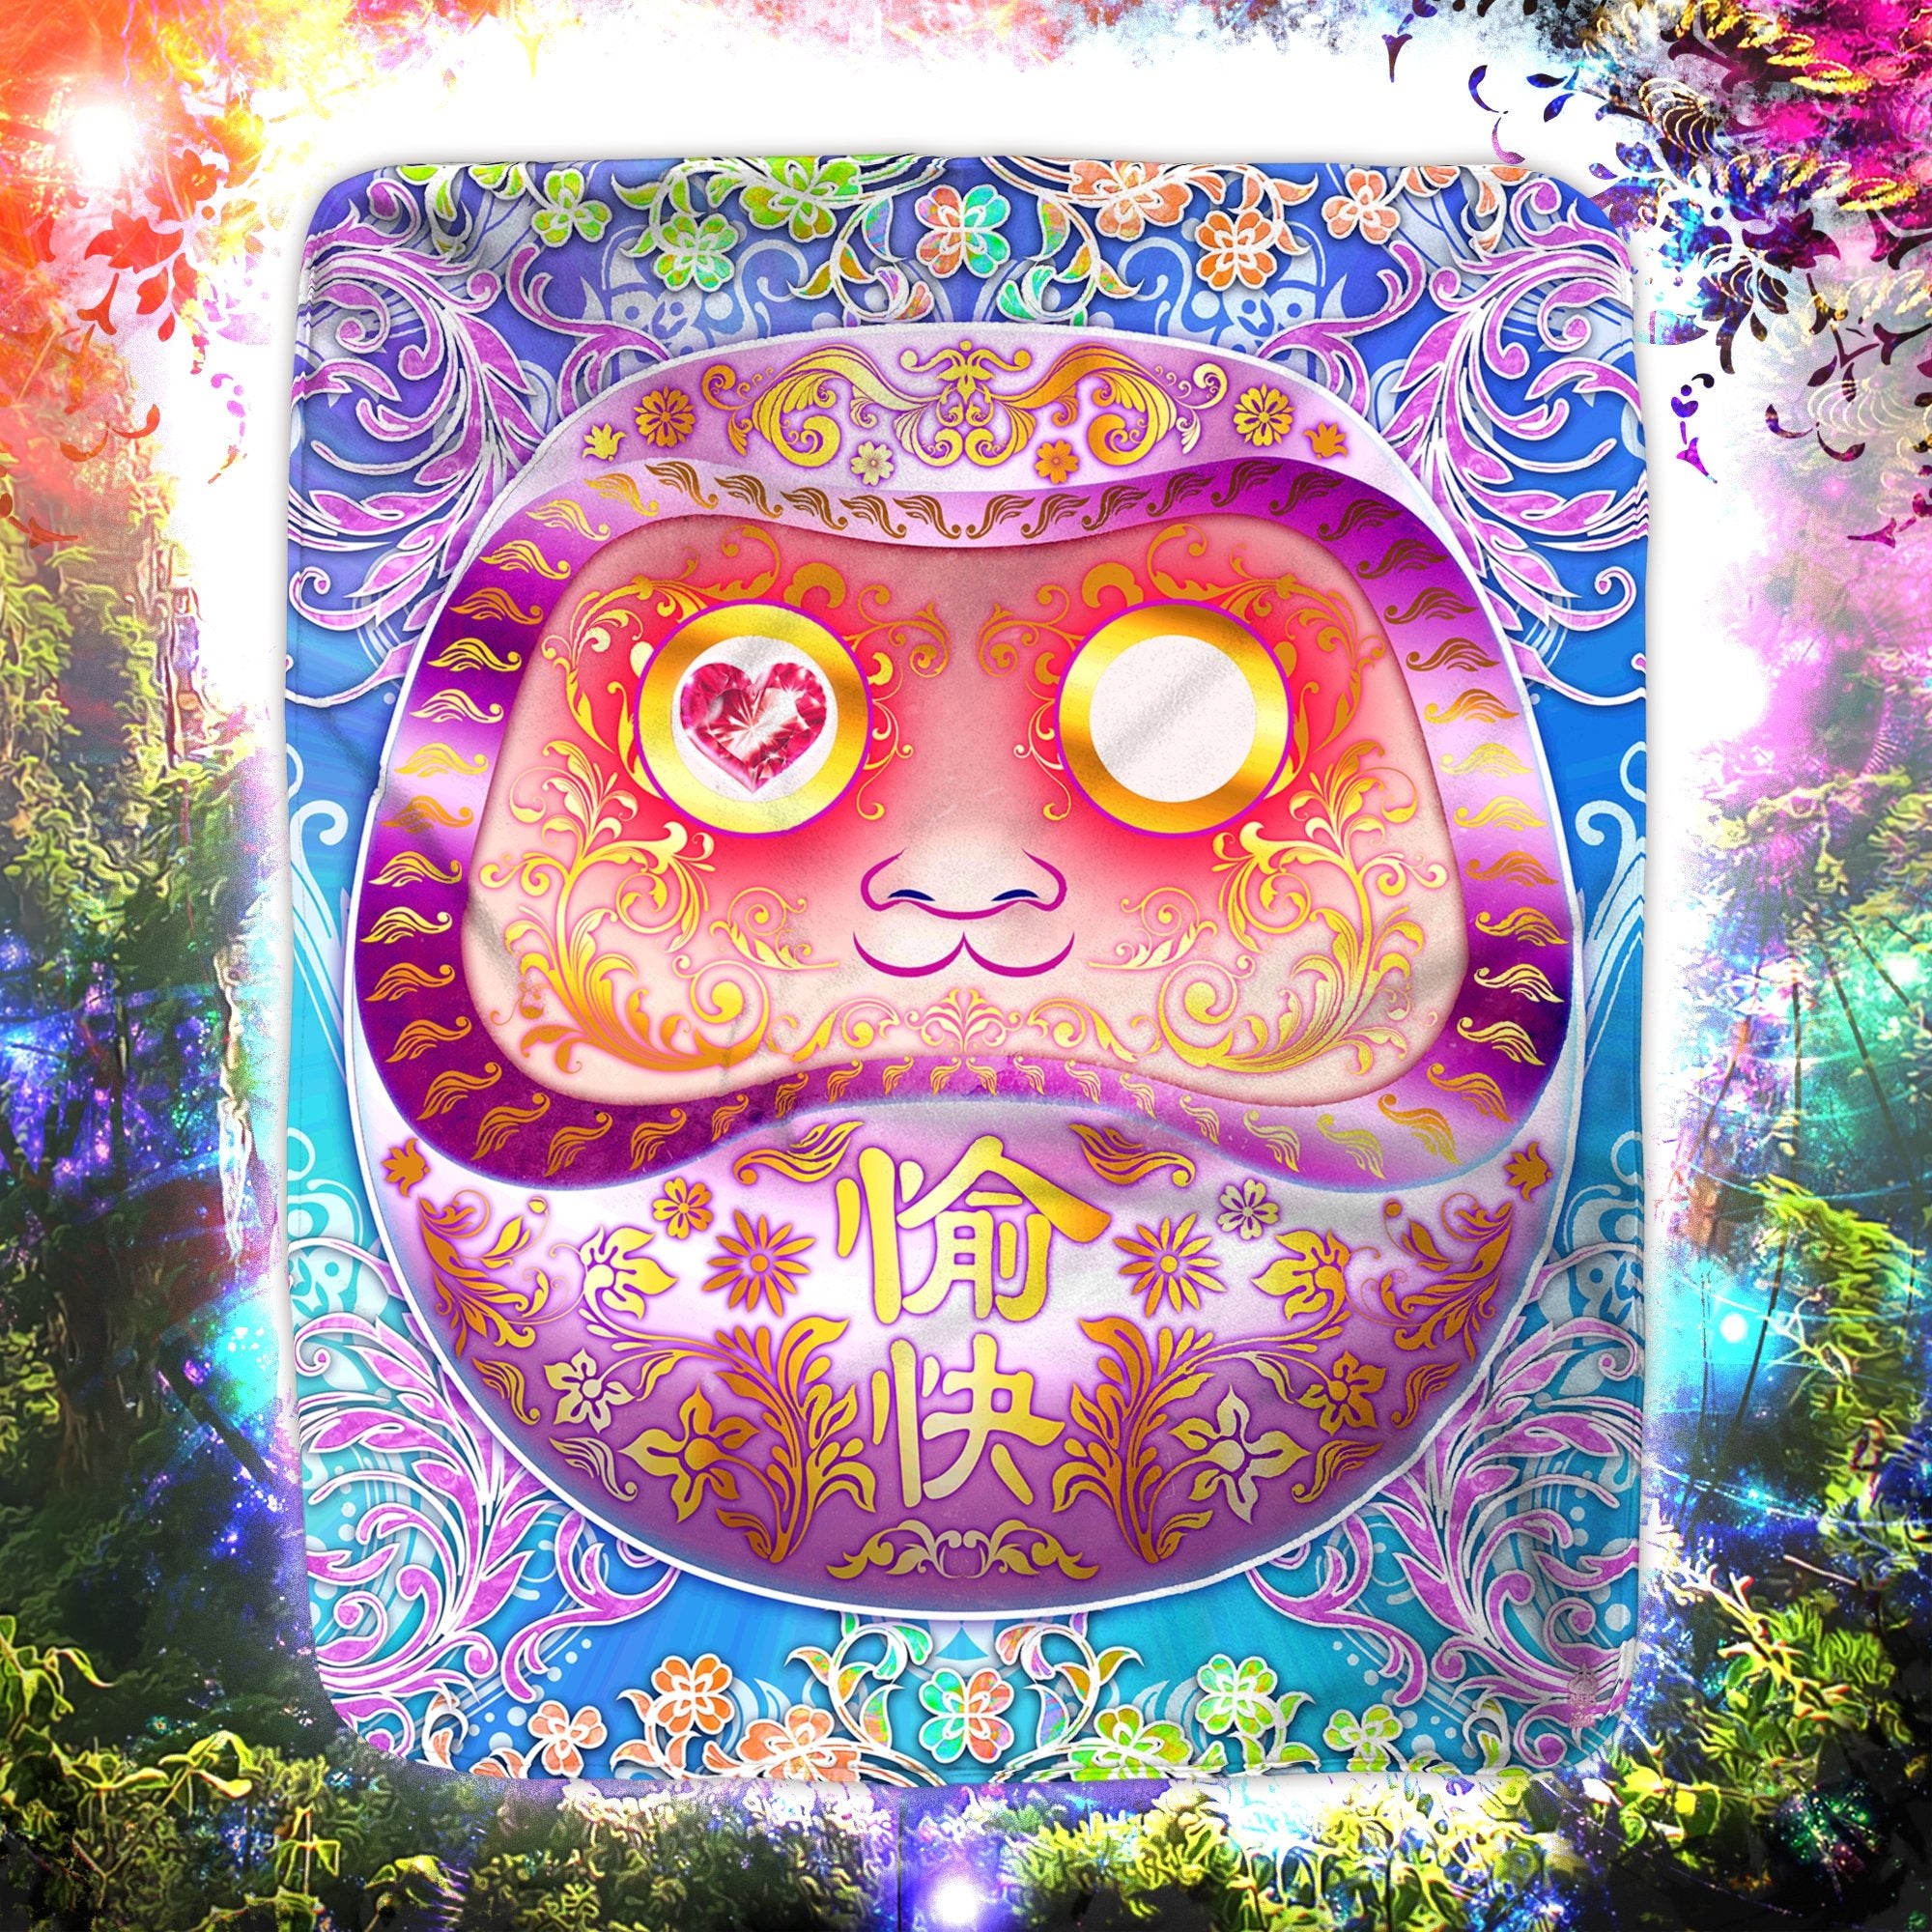 Kawaii Throw Fleece Blanket, Japanese Anime and Manga, Ecclectic Decor, Eclectic and Funky Gift - Psy Holographic Daruma - Abysm Internal